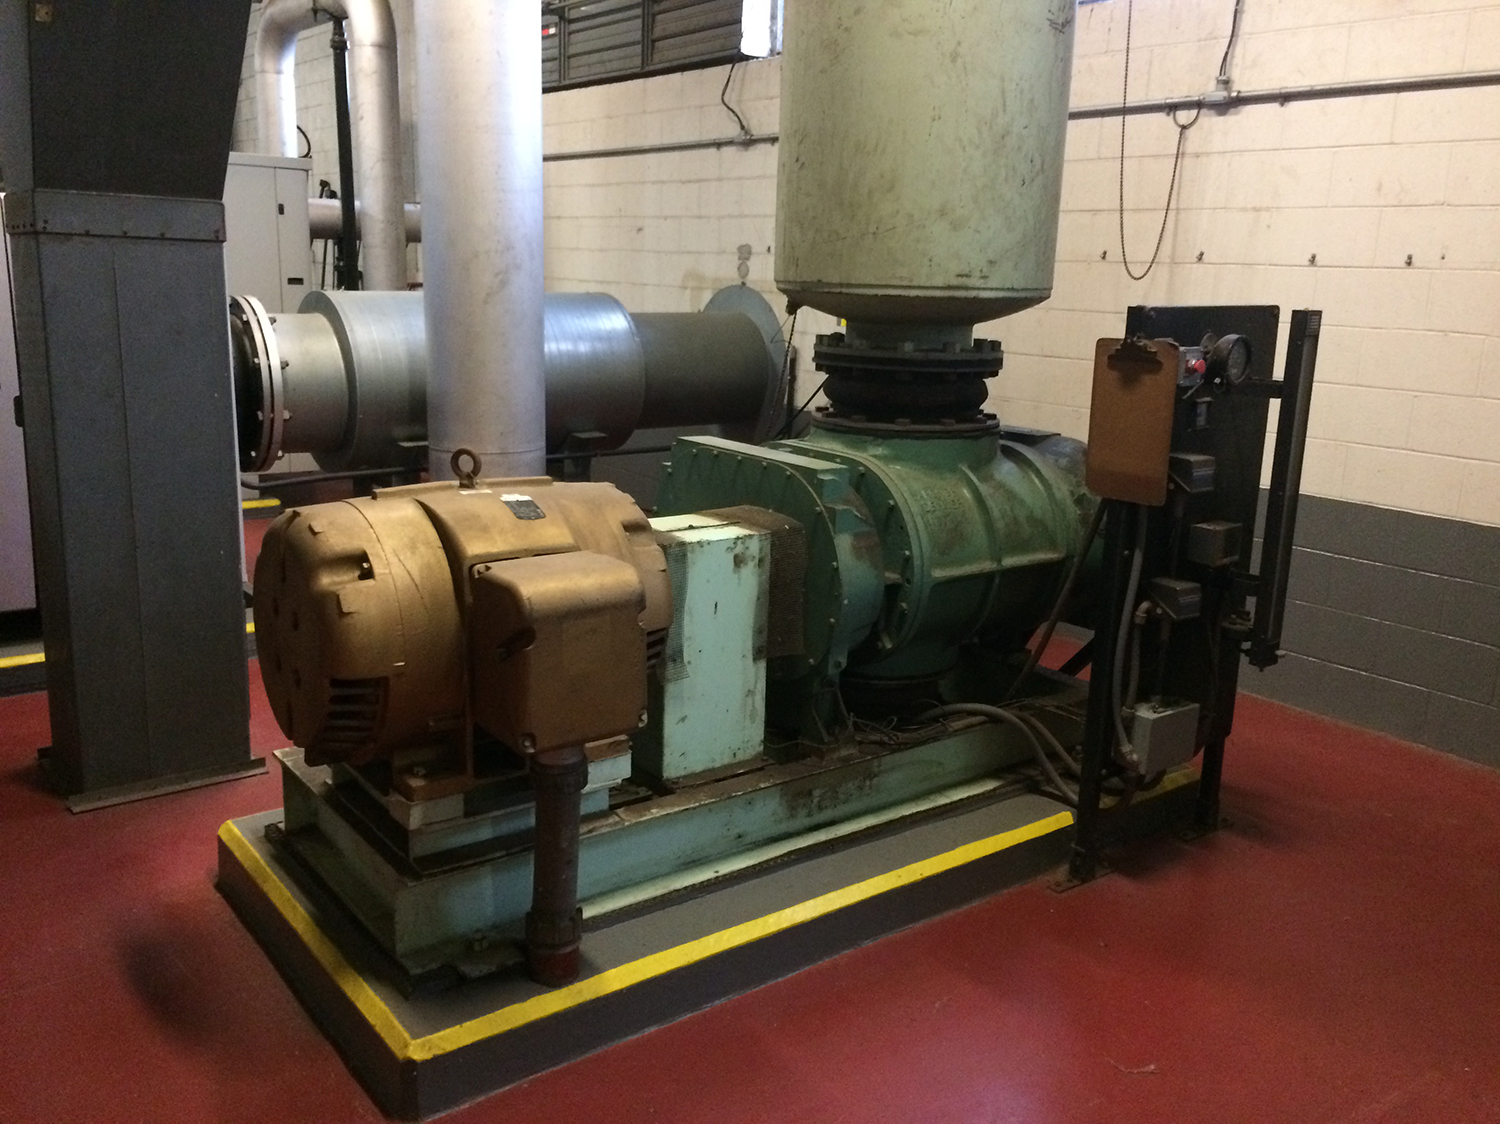 In the past rotary lobe blowers, also known as ”Roots” blowers, were a popular selection for waste water aeration.